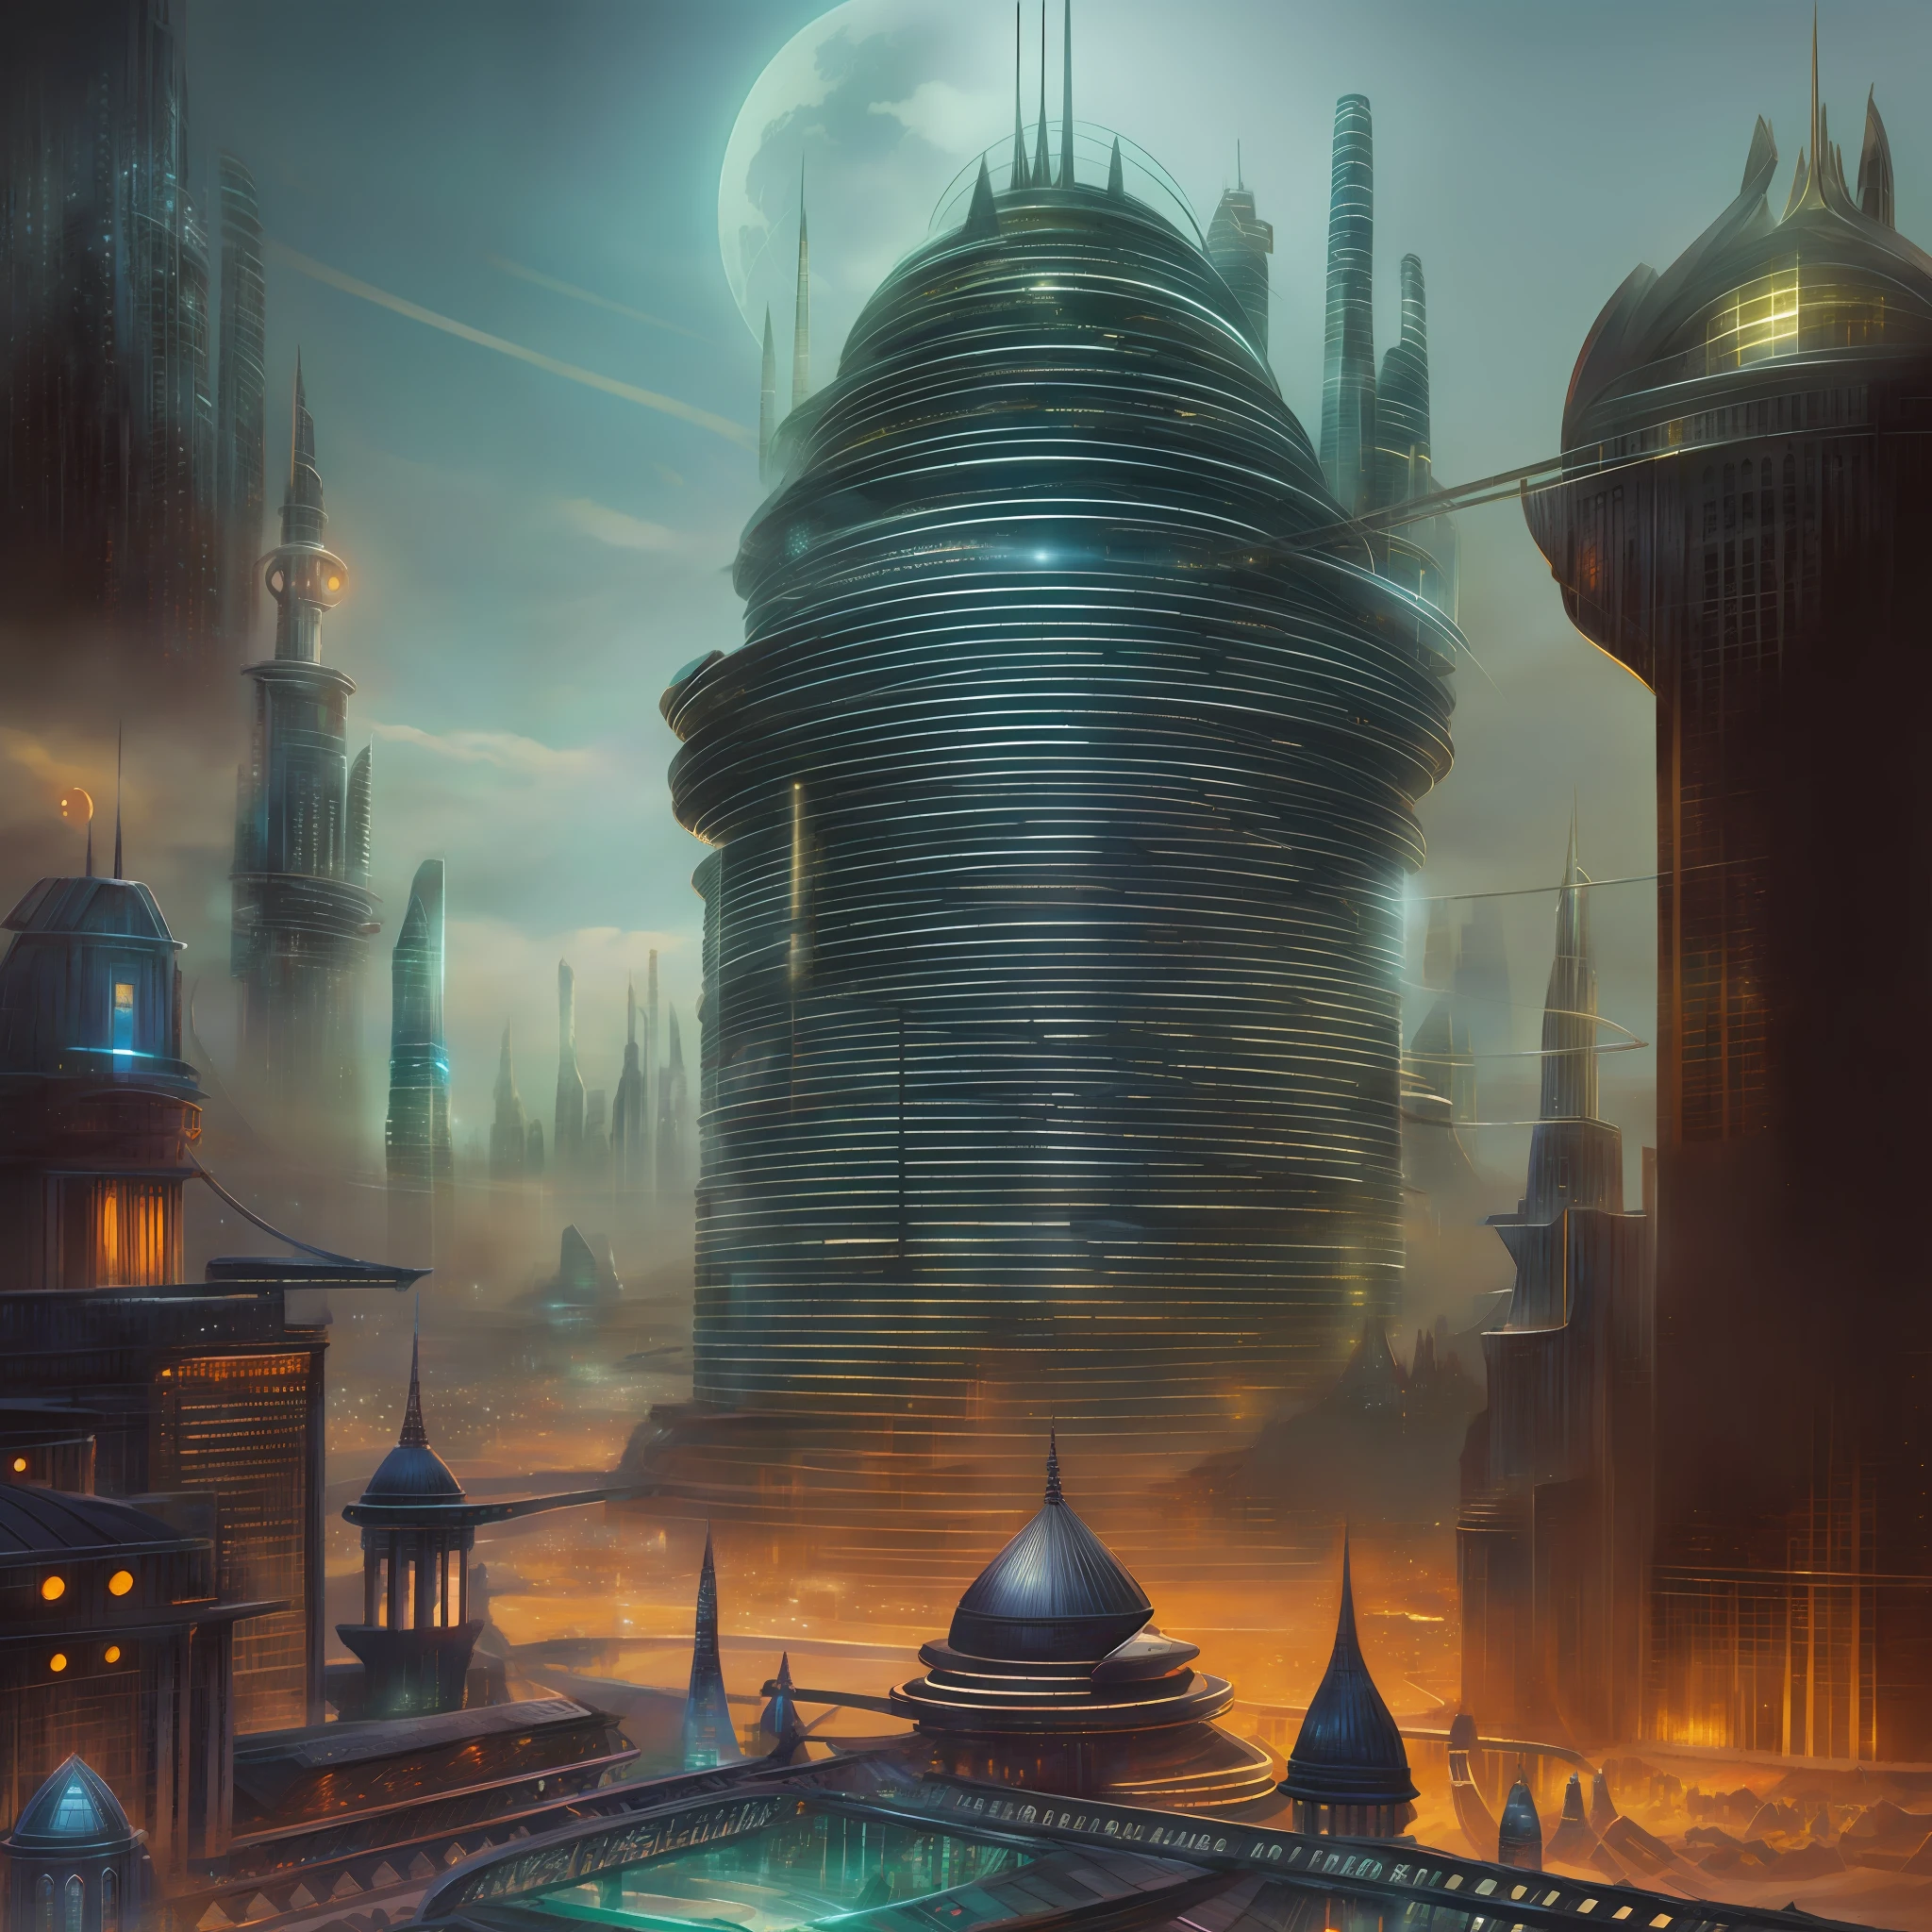 there is a large futuristic masterpiece Arabian castle in Quranic art style in the middle of a futuristic city with a moon, in fantasy sci - fi city, sci-fi fantasy wallpaper, masterpiece concept art cityscape, epic Arabic calligraphy art sci fi illustration, huge futuristic islamic design, fantasy scifi, with masterpiece Quranic art desktop wallpaper, fantasy art city background, in front of a fantasy city, fantasy city, in a castle on an alien planet with masterpiece Calligraphy.